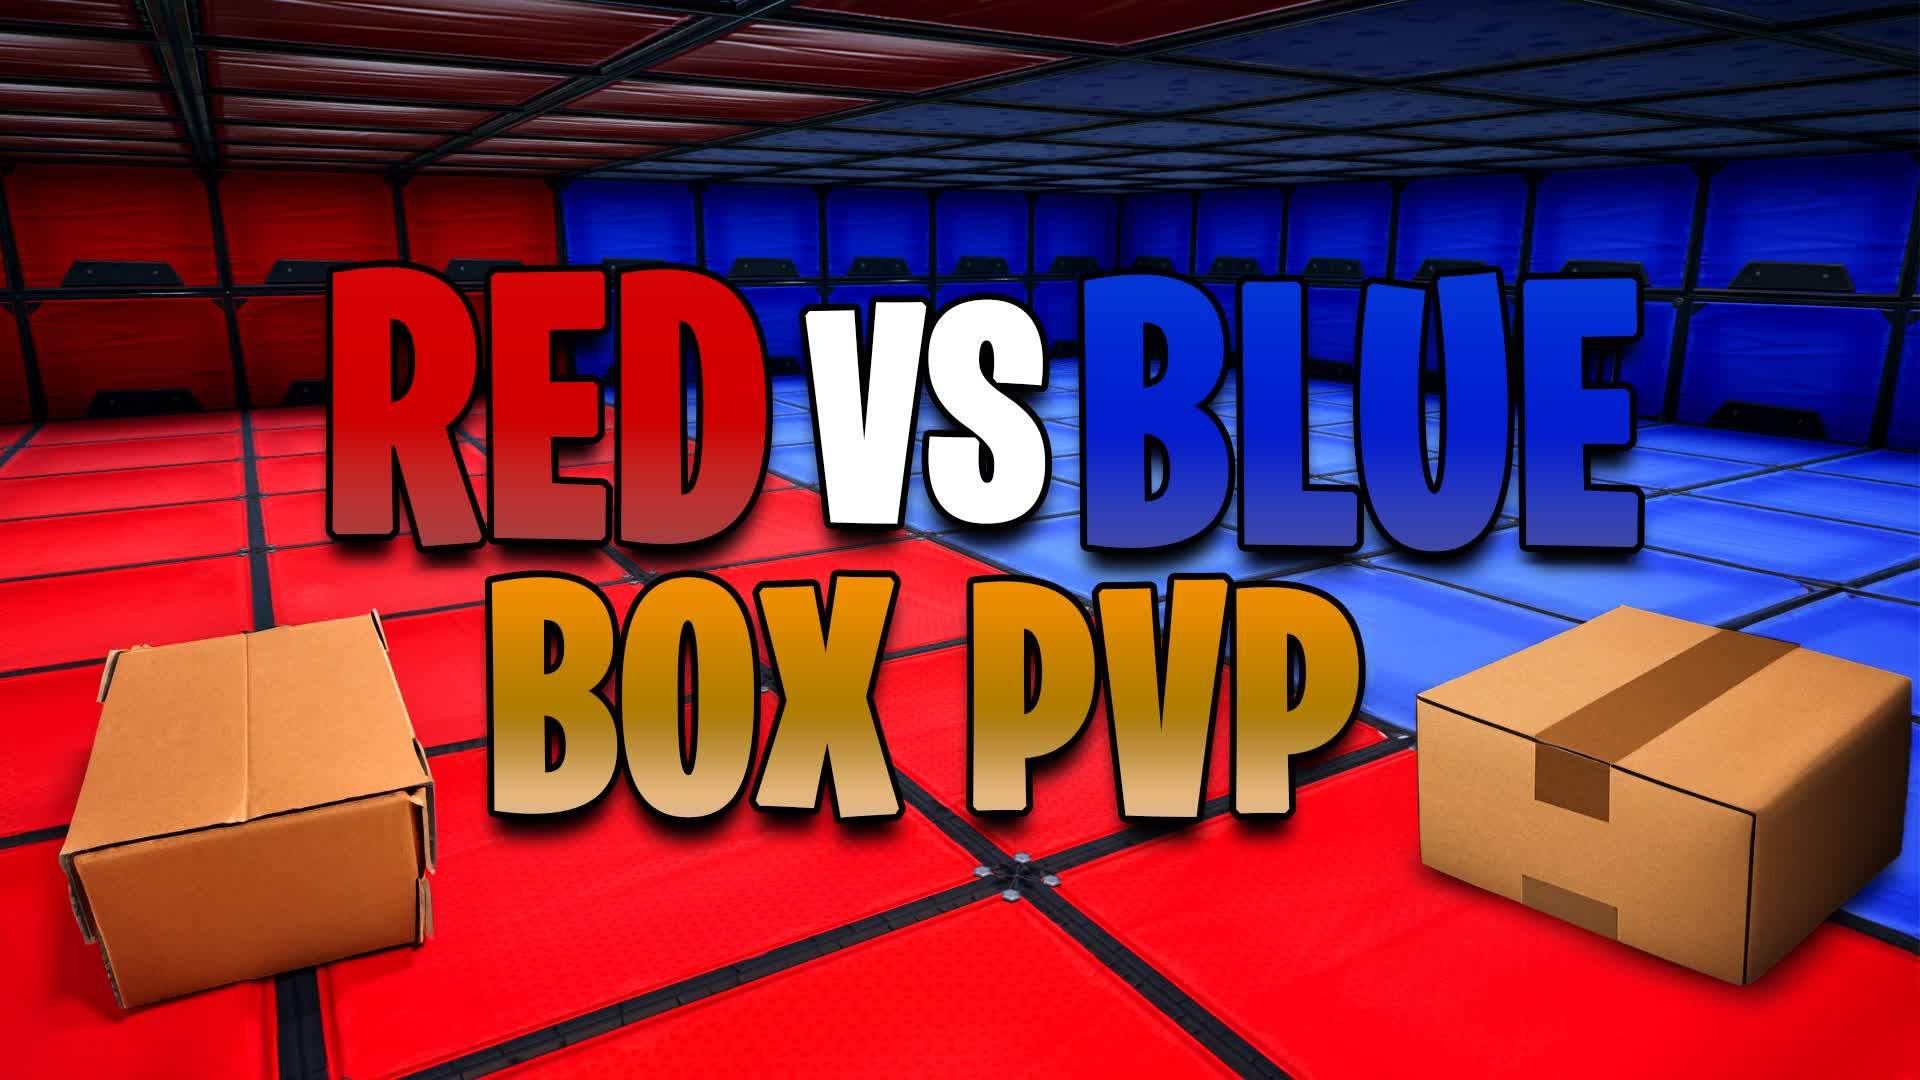 RED VS BLUE BOX PVP🔴🔵 (MYTHIC WEAPONS)